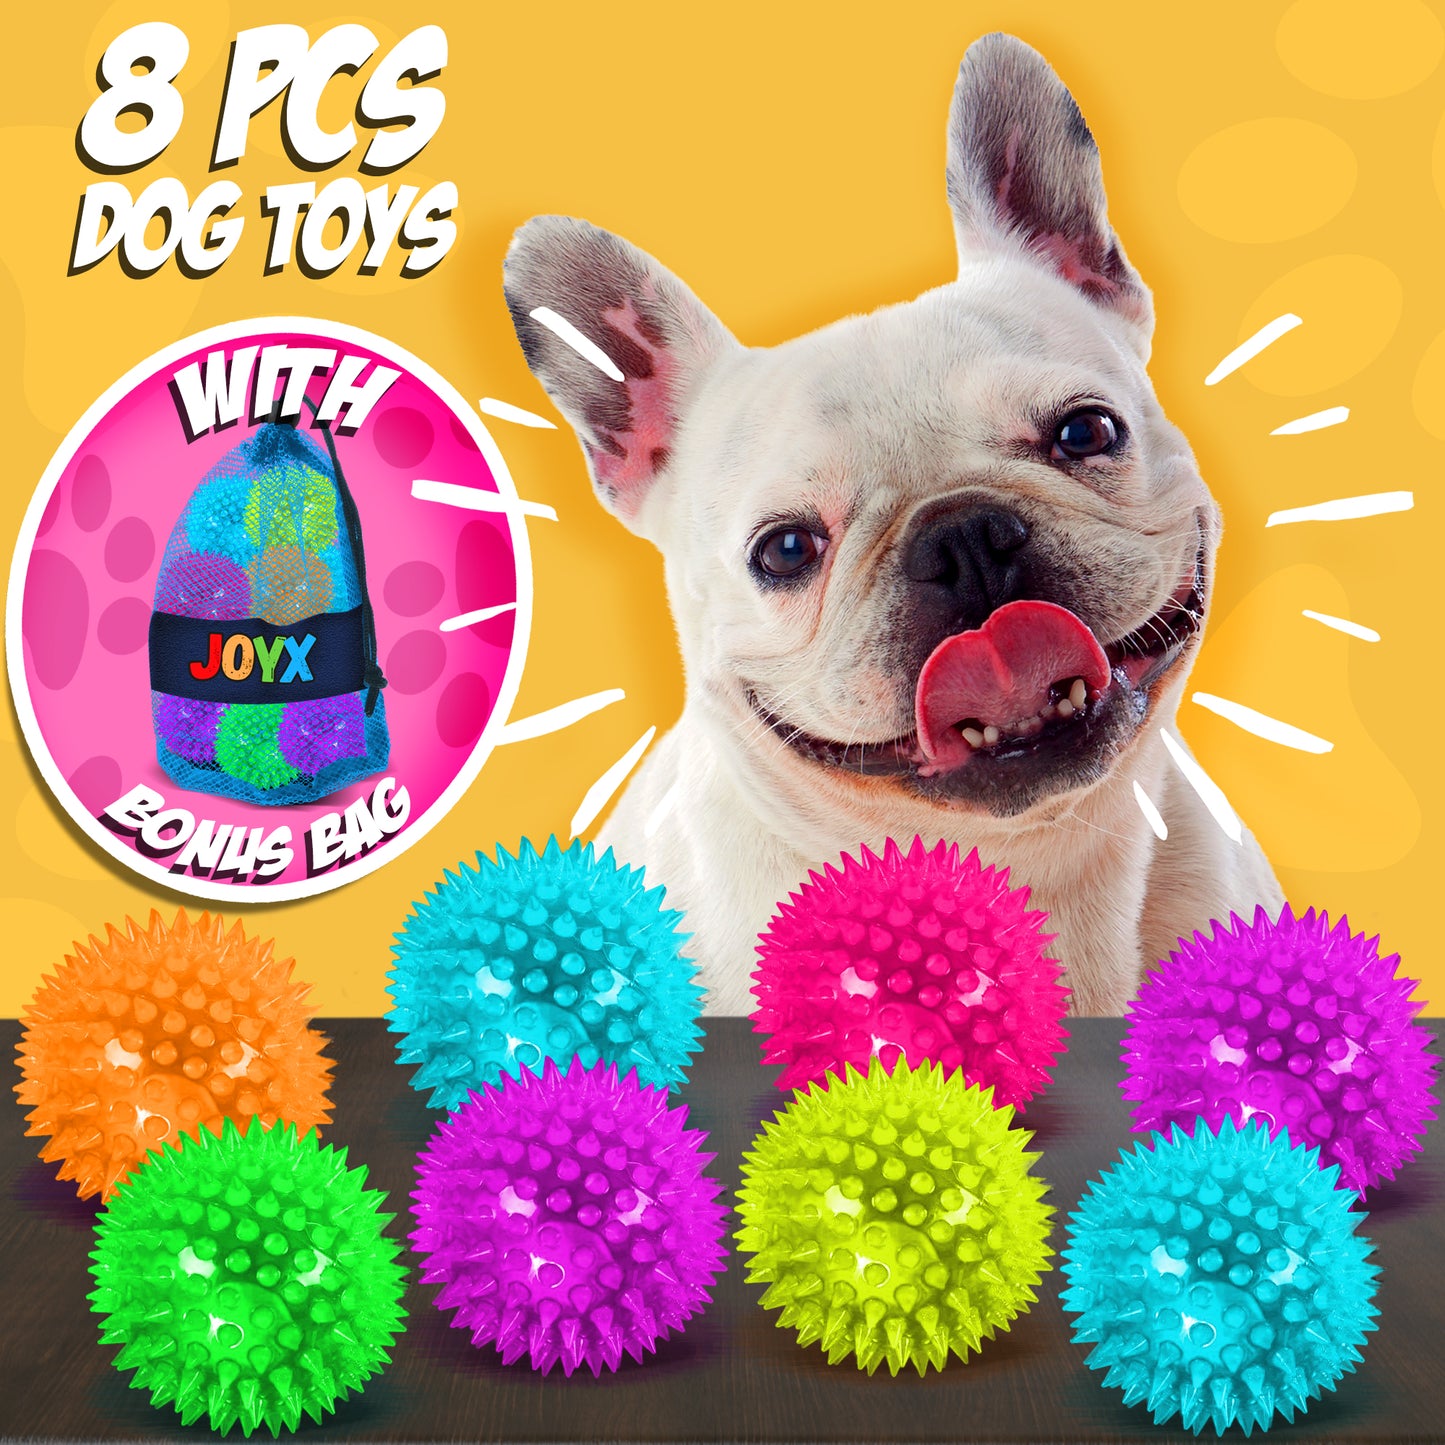 Multi-colored dog toys with a squeaky feature